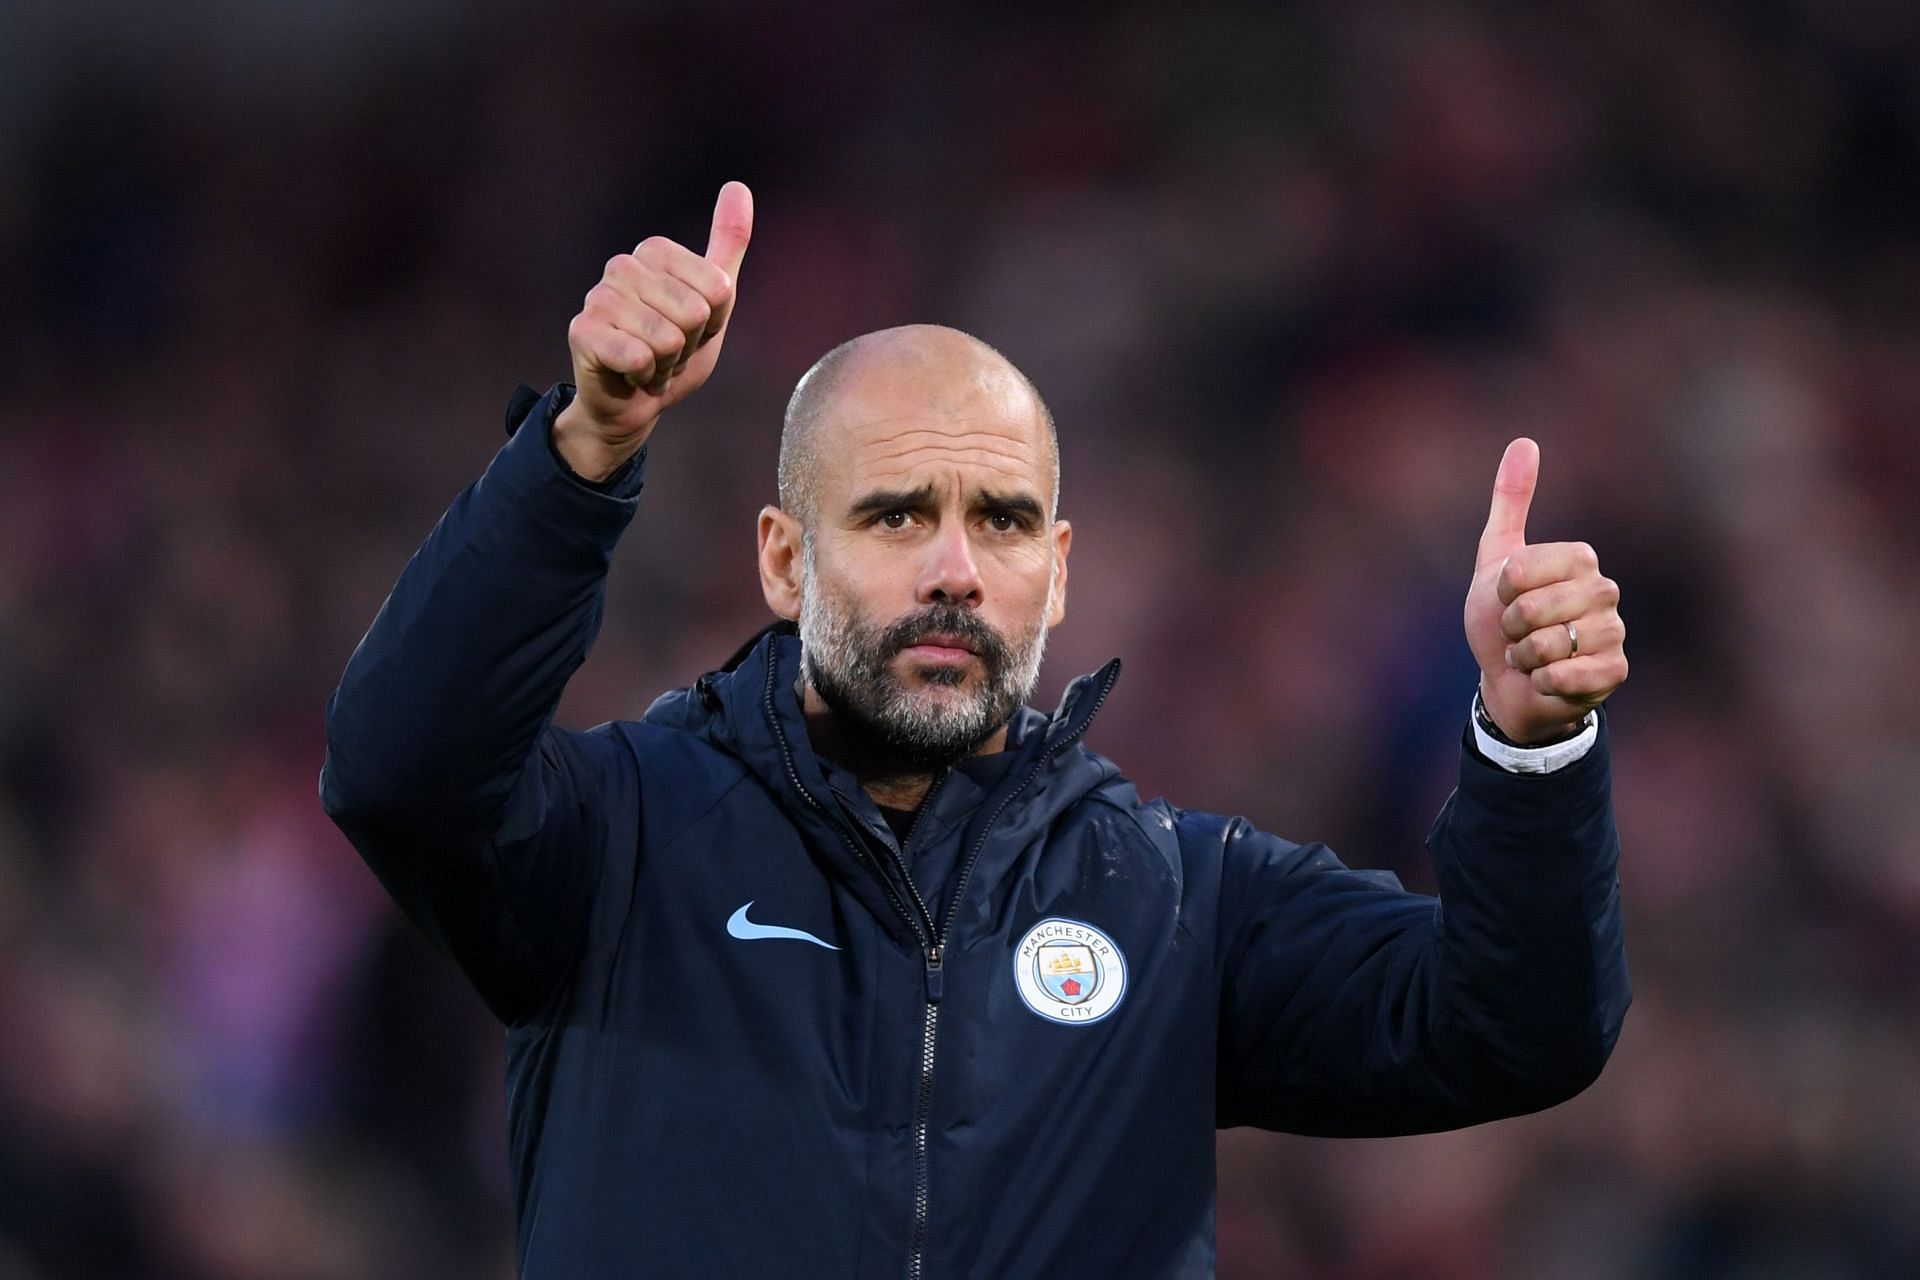 Pep Guardiola is one of the best managers in the world right now